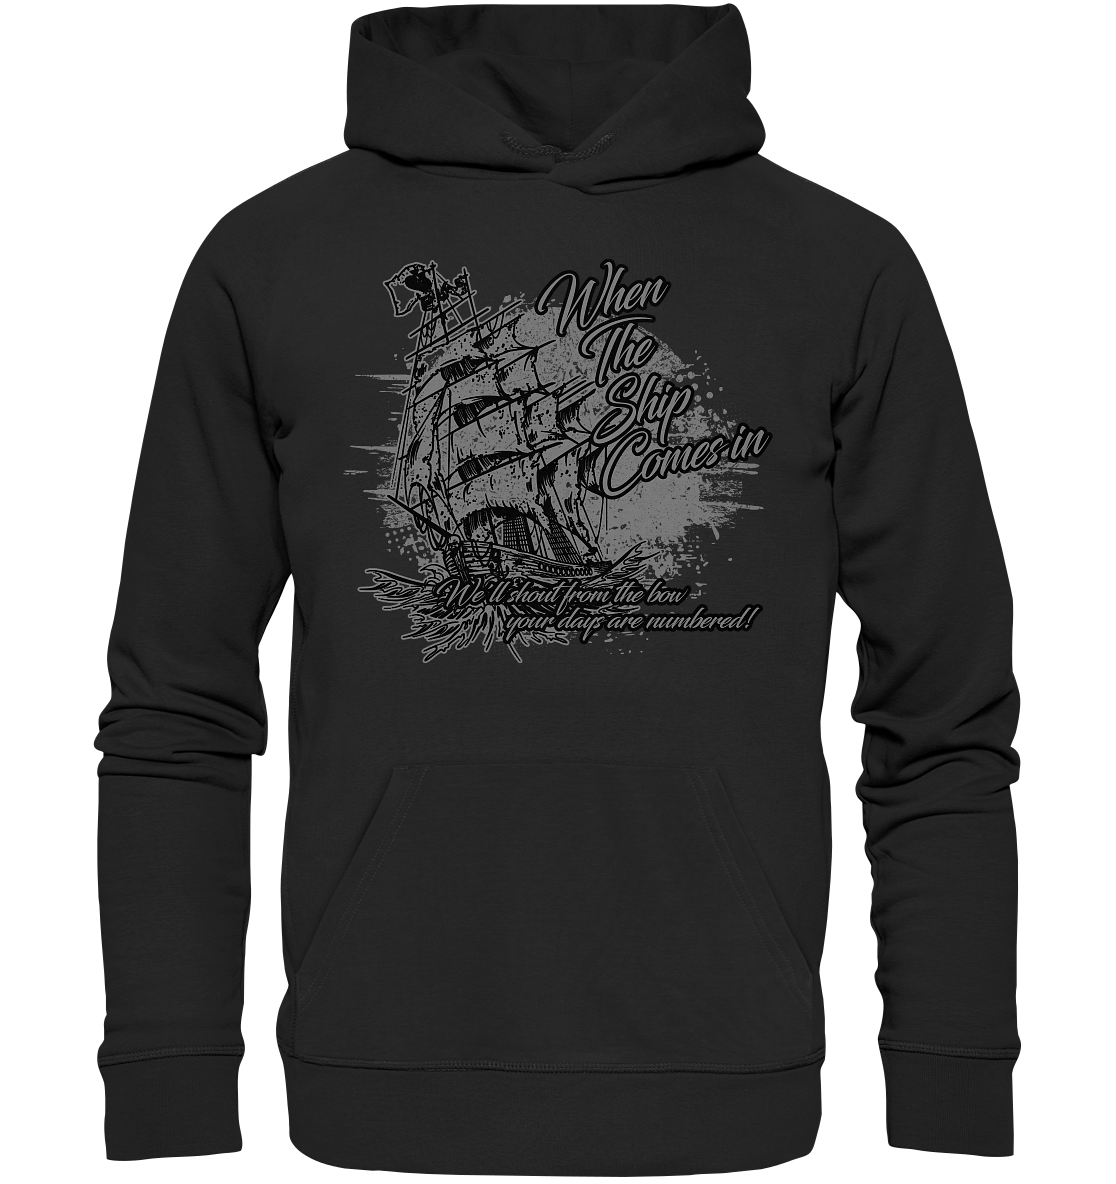 When The Ship Comes In - Premium Unisex Hoodie